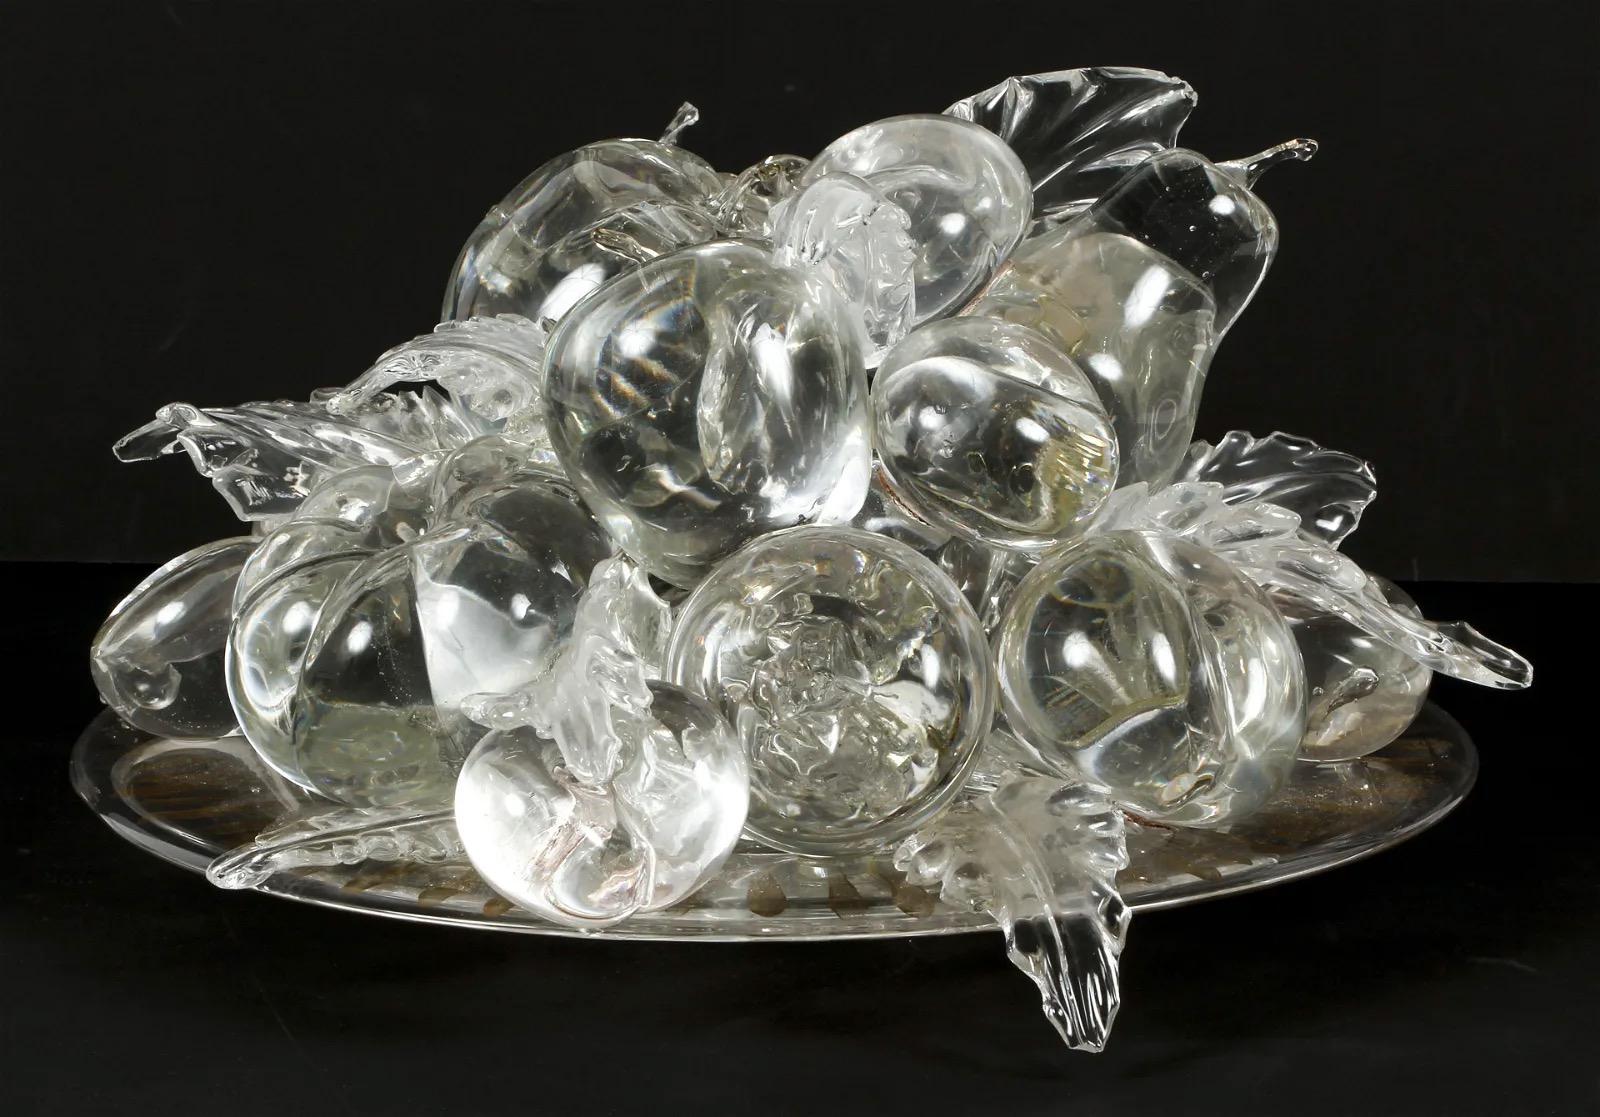 Contemporary Realistically Blown Glass Realistic Tray Depicting Mixed Fruits by Beth Lipman For Sale